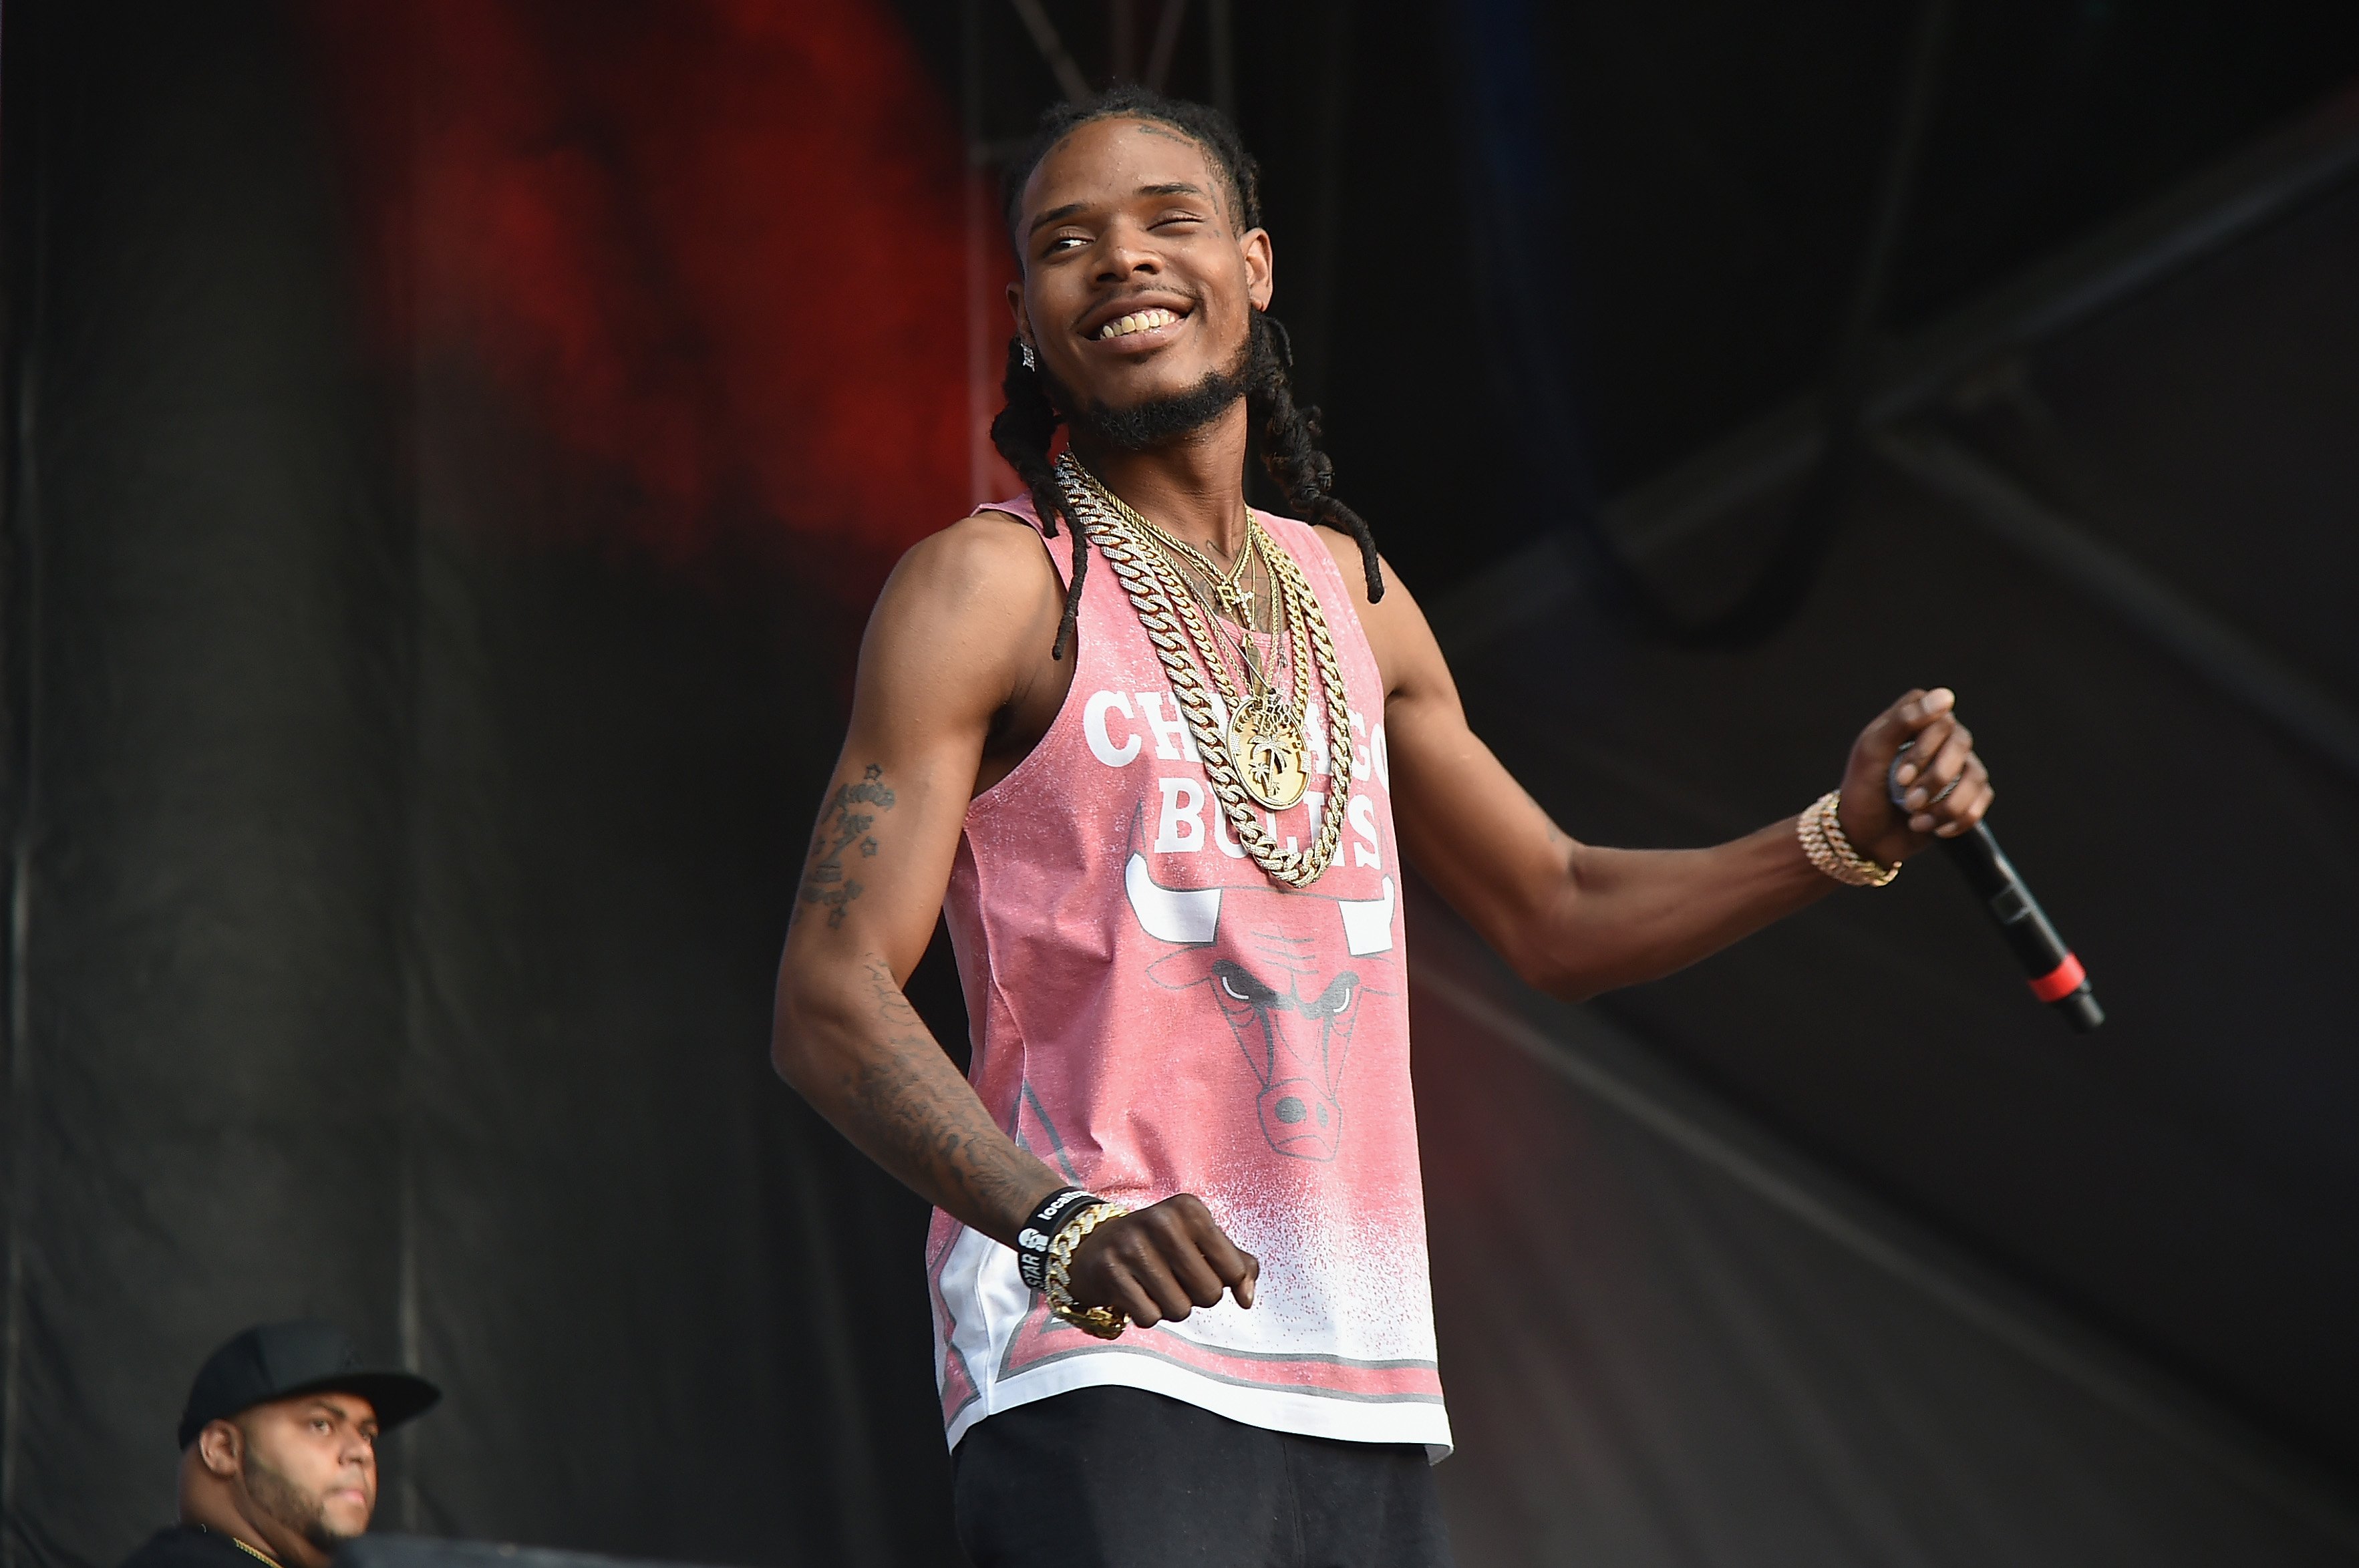 Fetty Wap performing at the 2016 Firefly Music Festival. | Photo: Getty Images